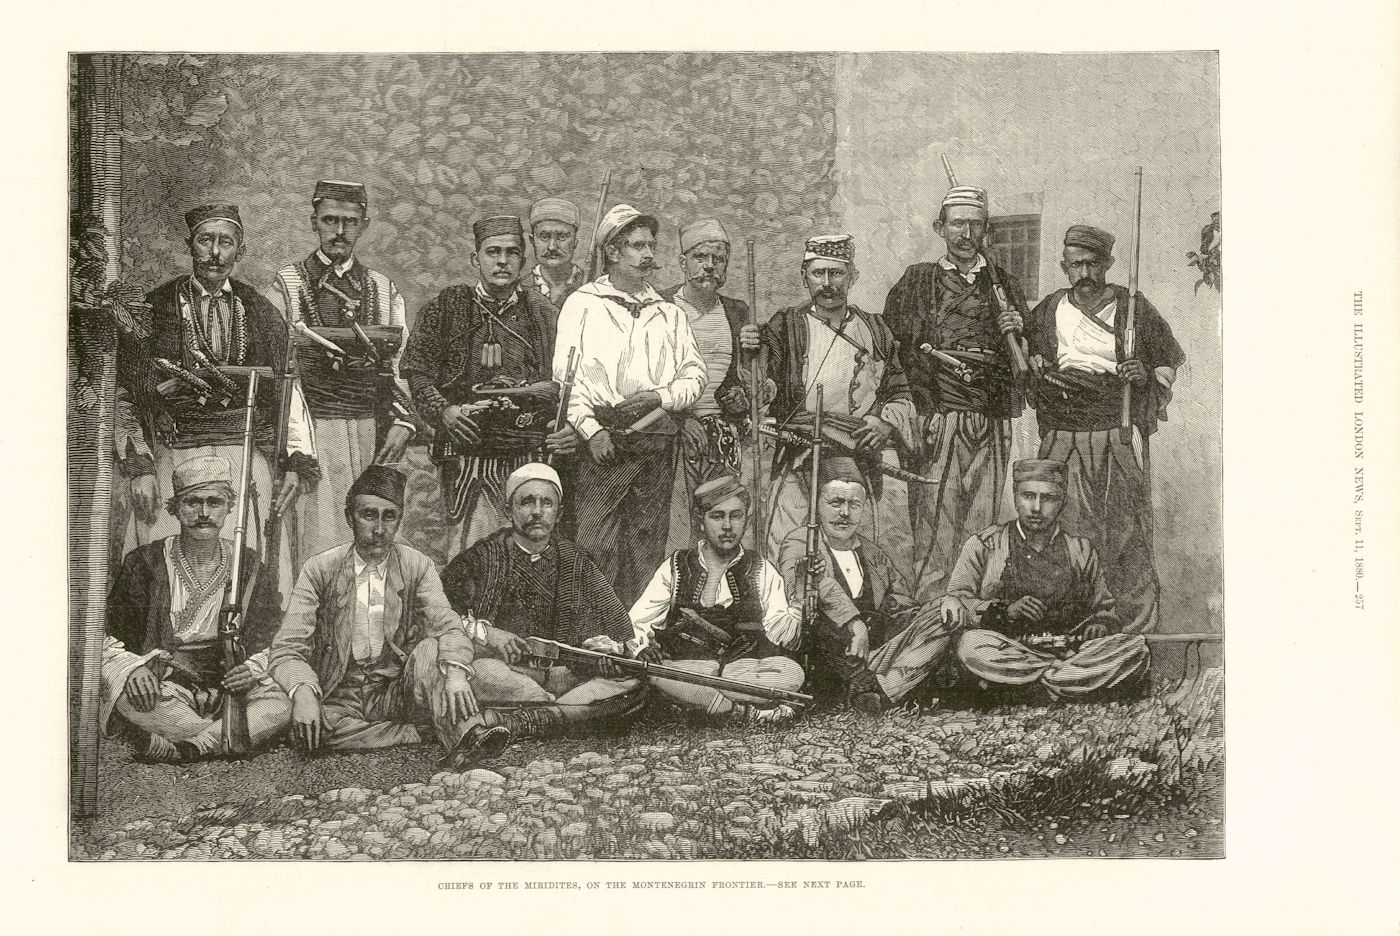 Associate Product Chiefs of the Miridites, on the Montenegrin frontier. Tribal. Montenegro 1880